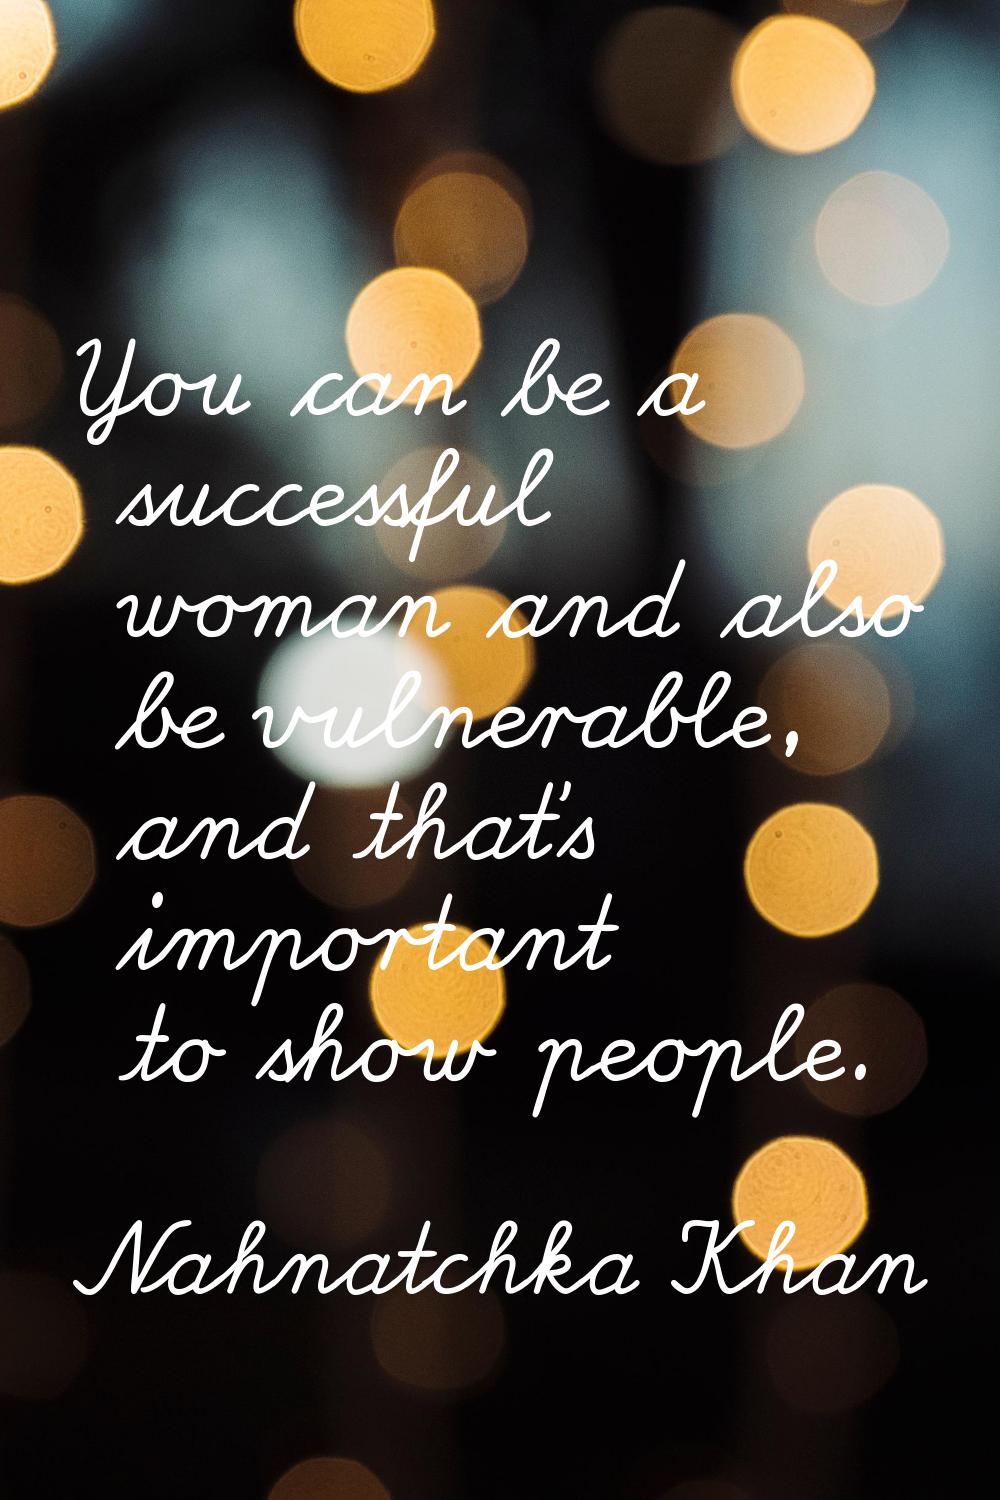 You can be a successful woman and also be vulnerable, and that's important to show people.